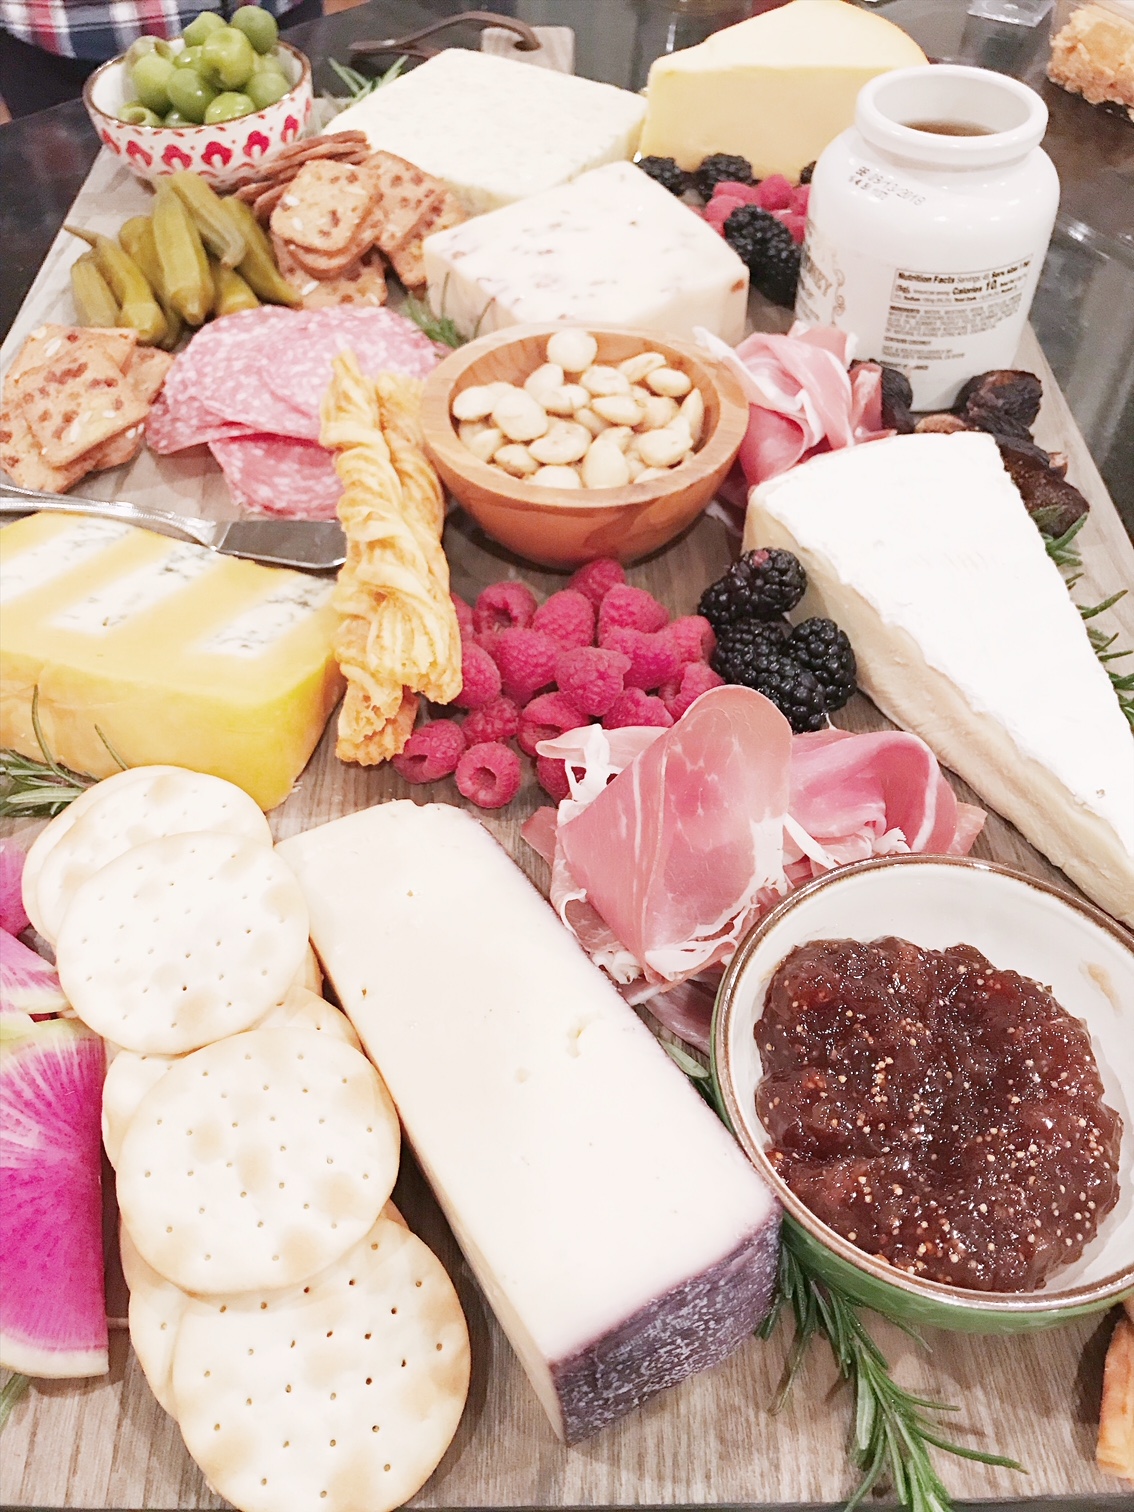 Of course, you have to have a great board to put all of this yummy goodness on too.